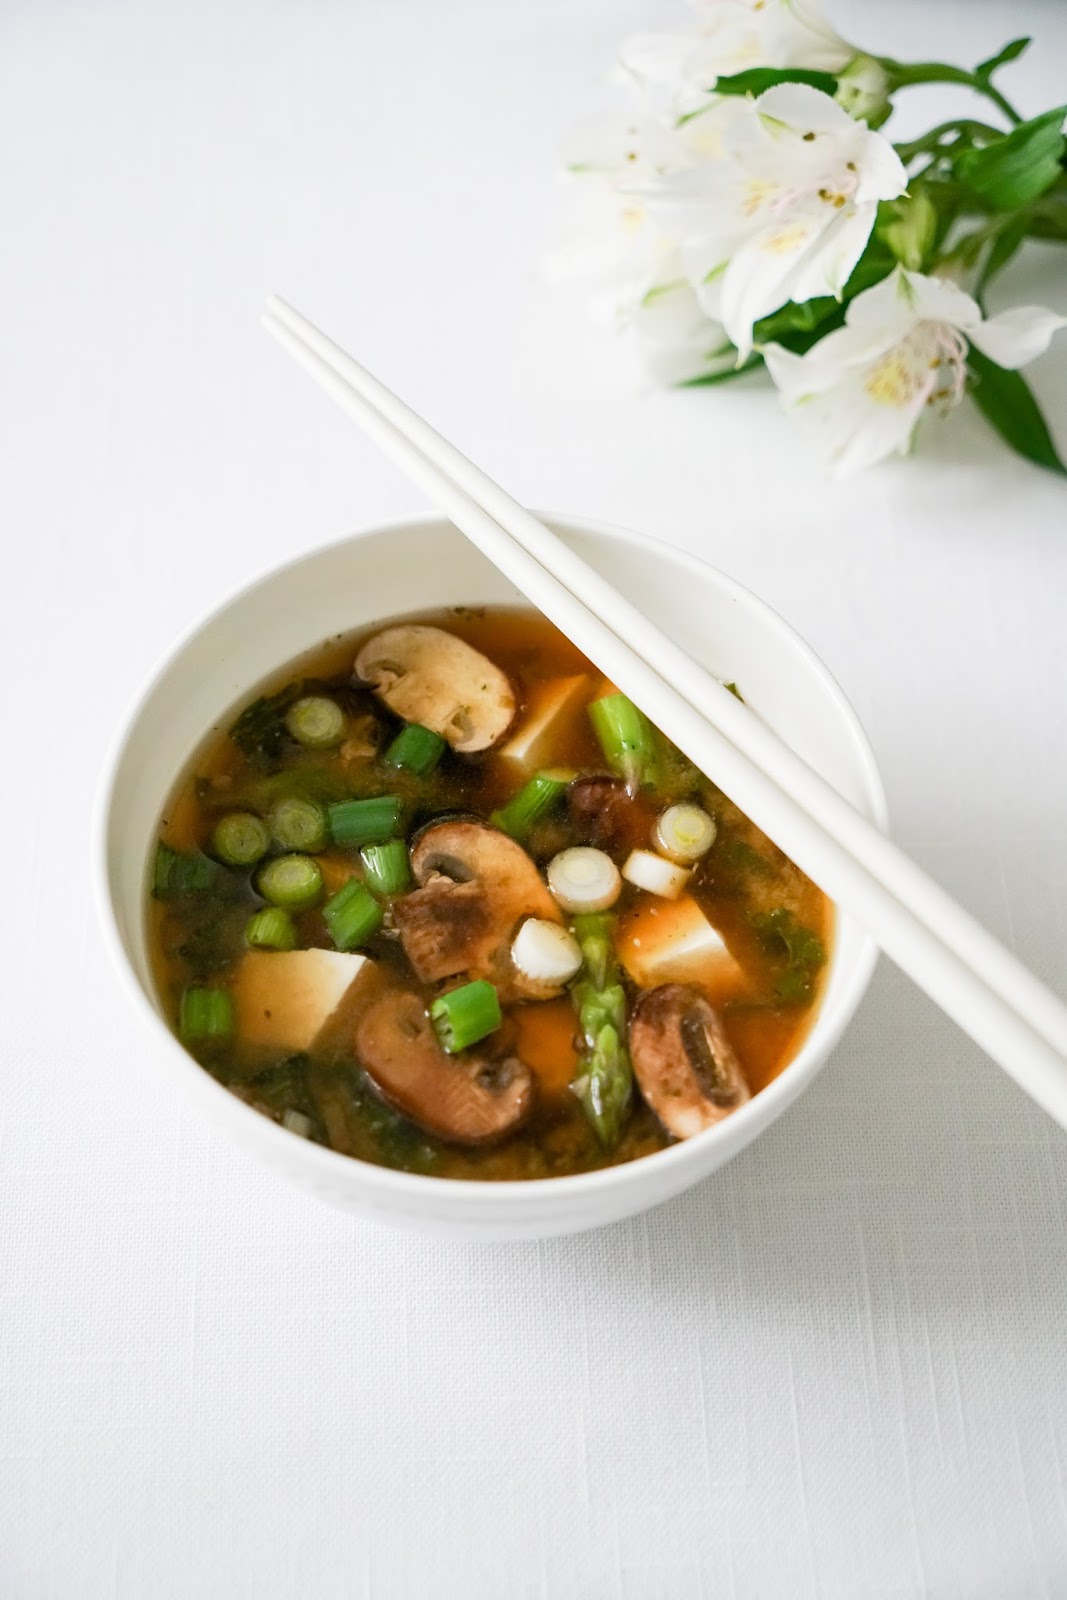 Red miso soup with asparagus, mushrooms and kale (vegan)